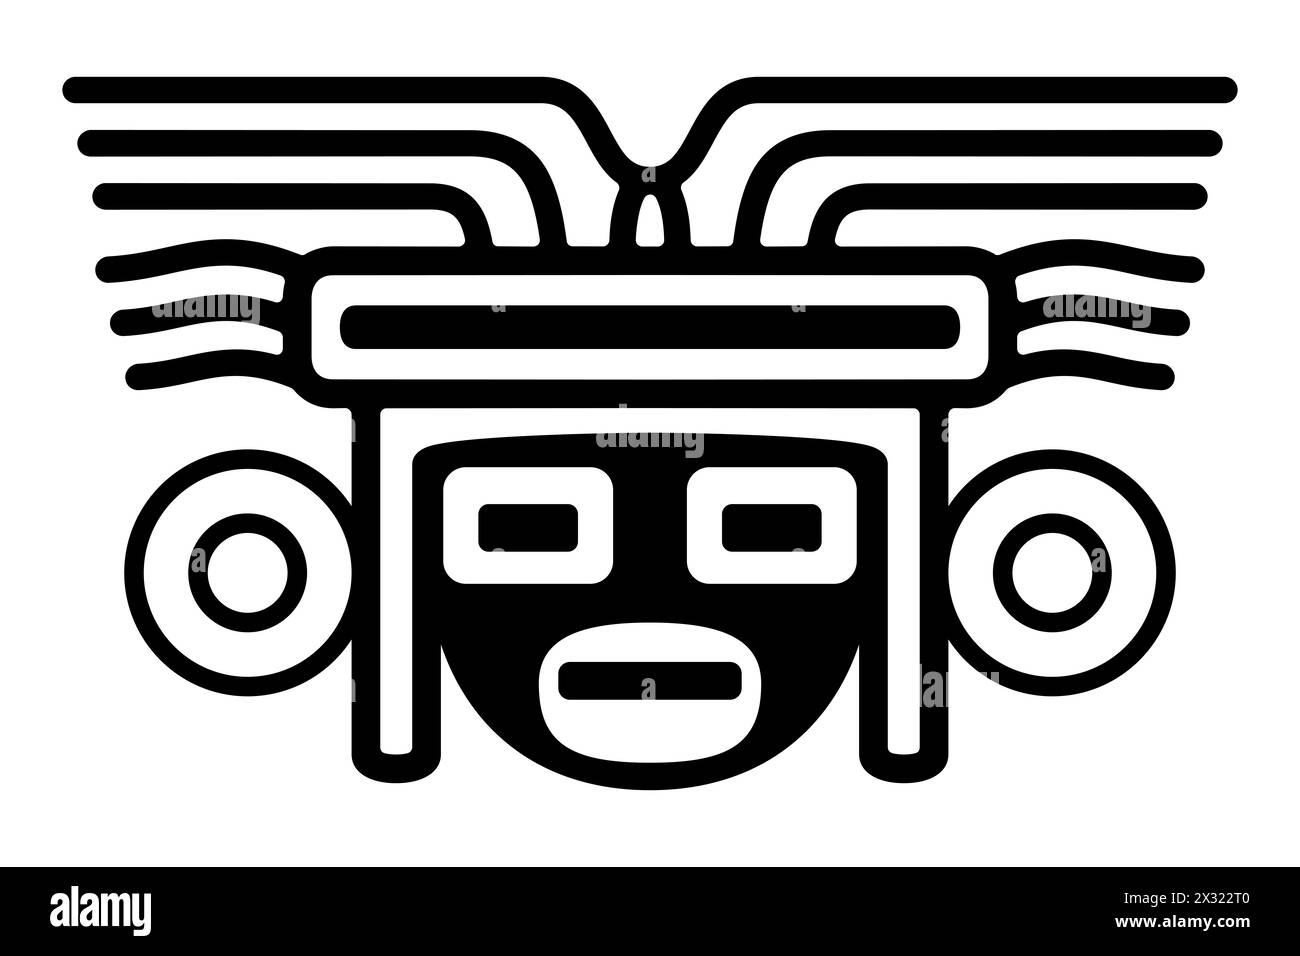 Head with mask large headdress, an ancient Mexican motif. Pre-Columbian, Aztec flat clay stamp motif, found in Tenochtitlan, the center of Mexico City. Stock Photo